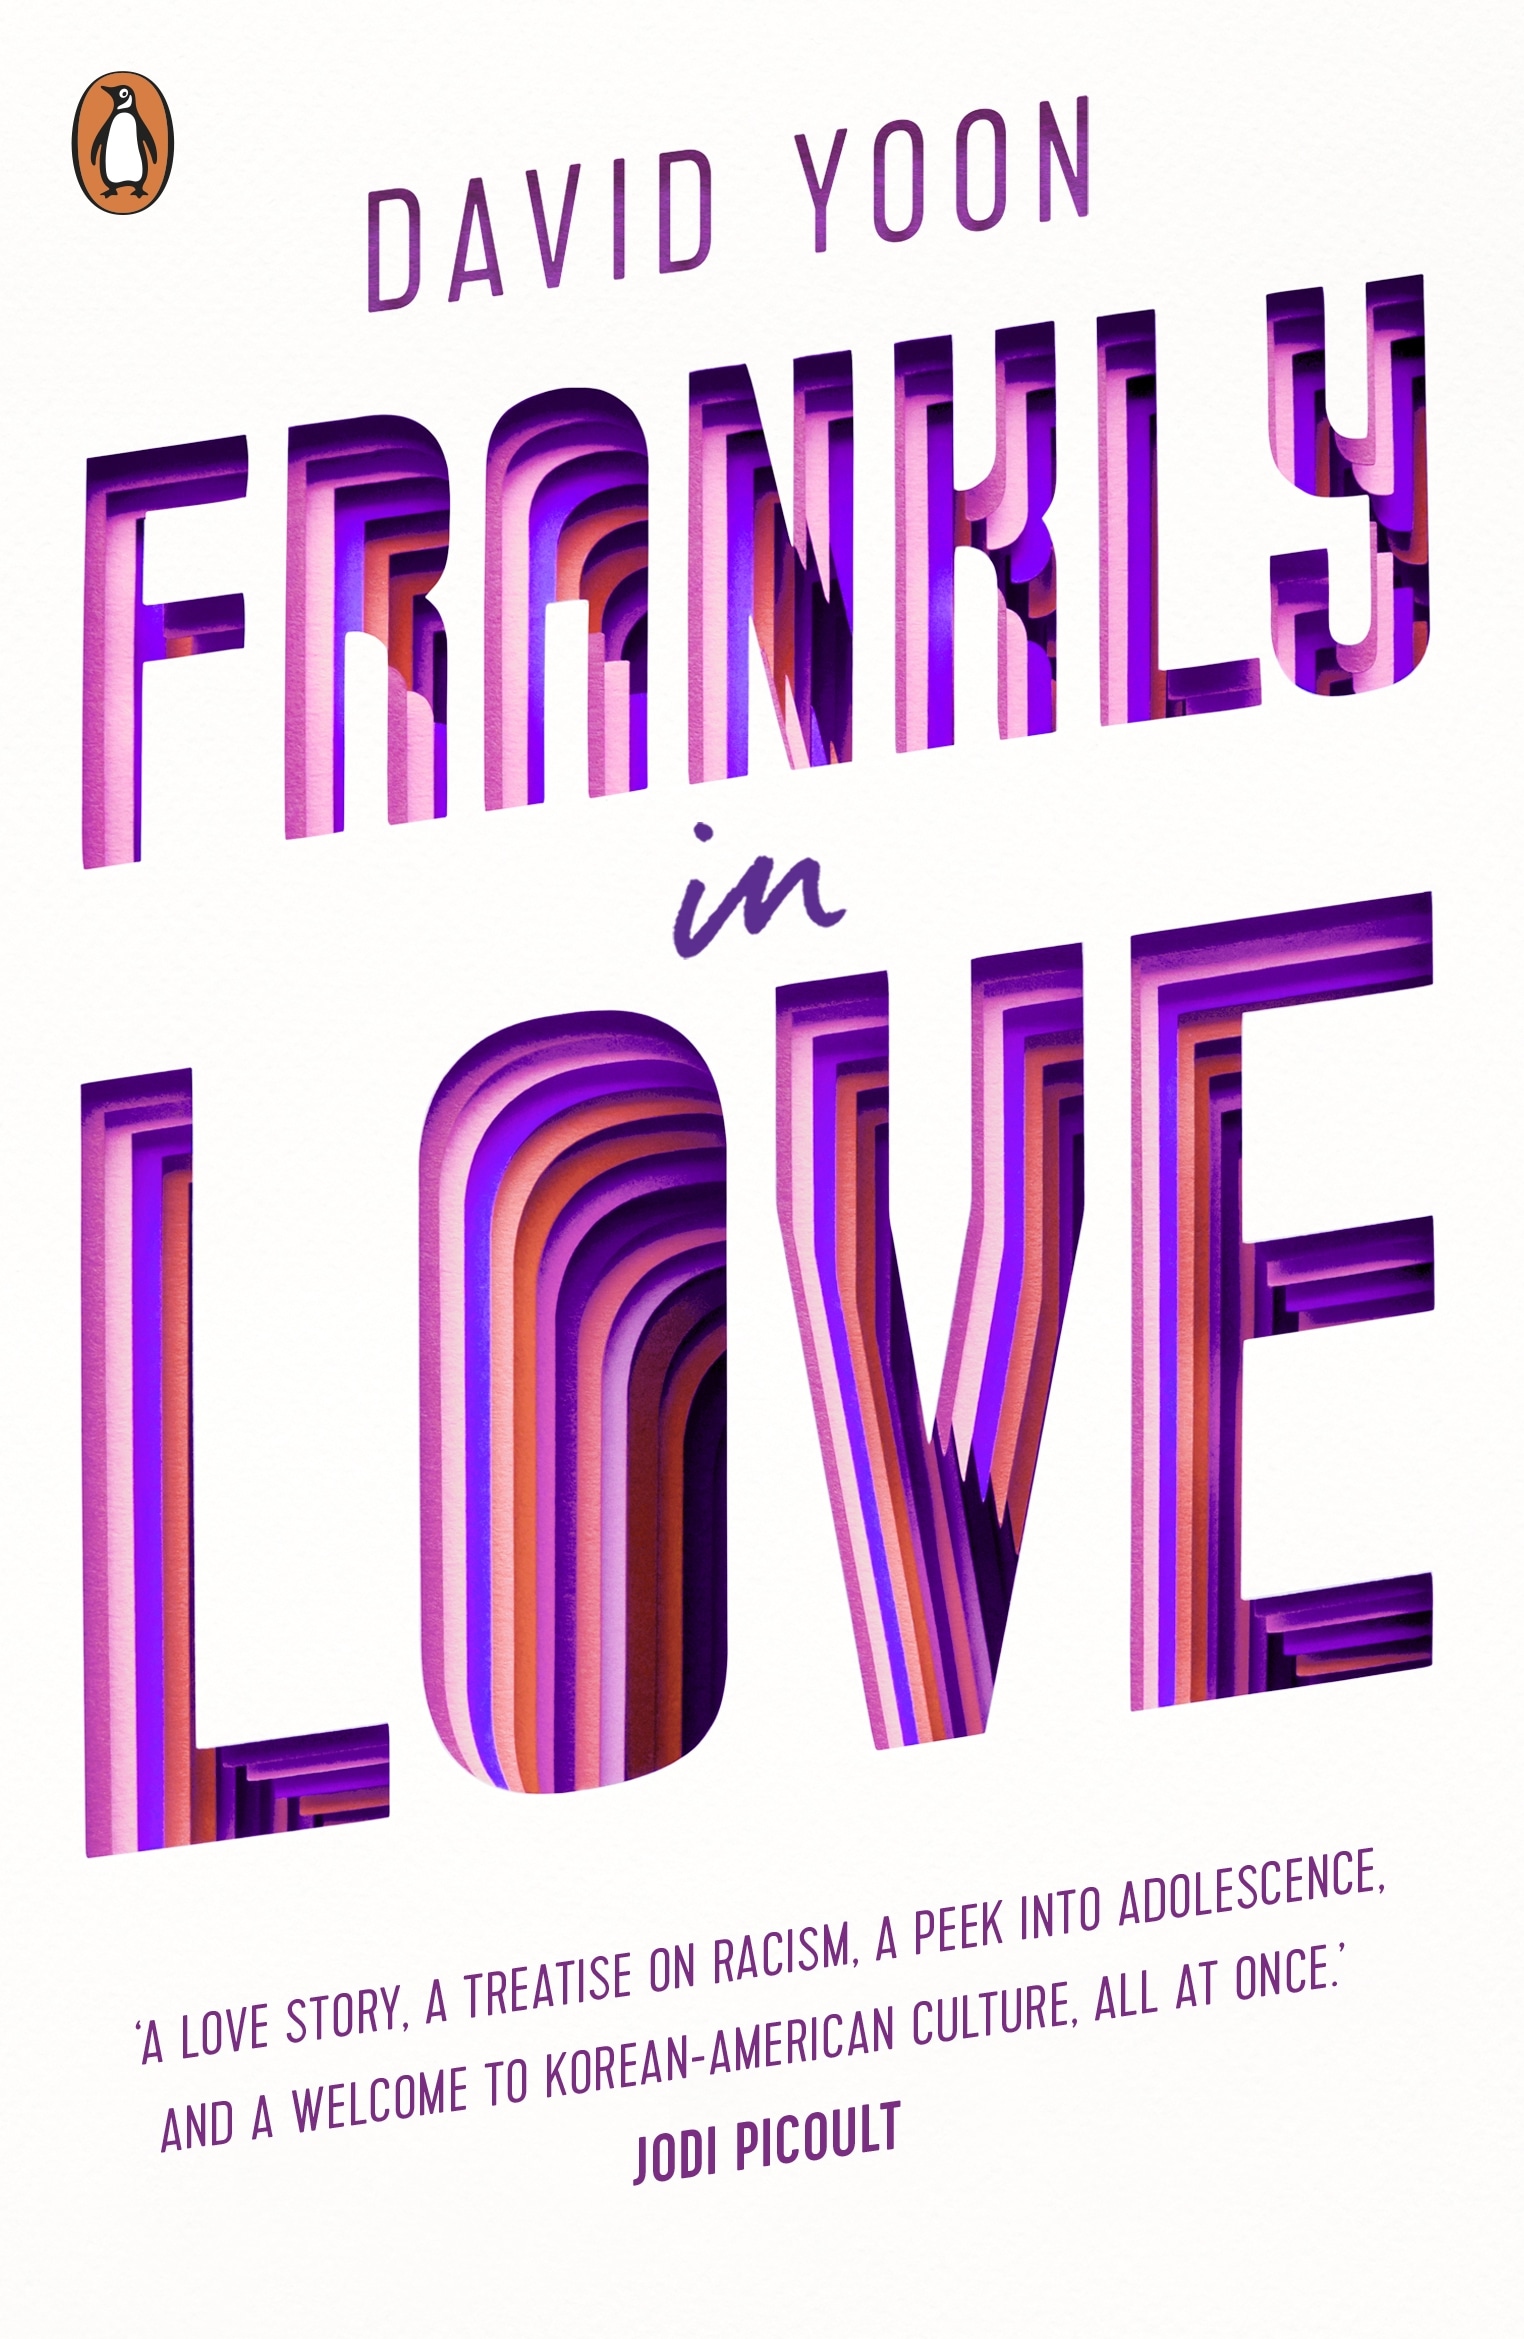 Book “Frankly in Love” by David Yoon — September 12, 2019